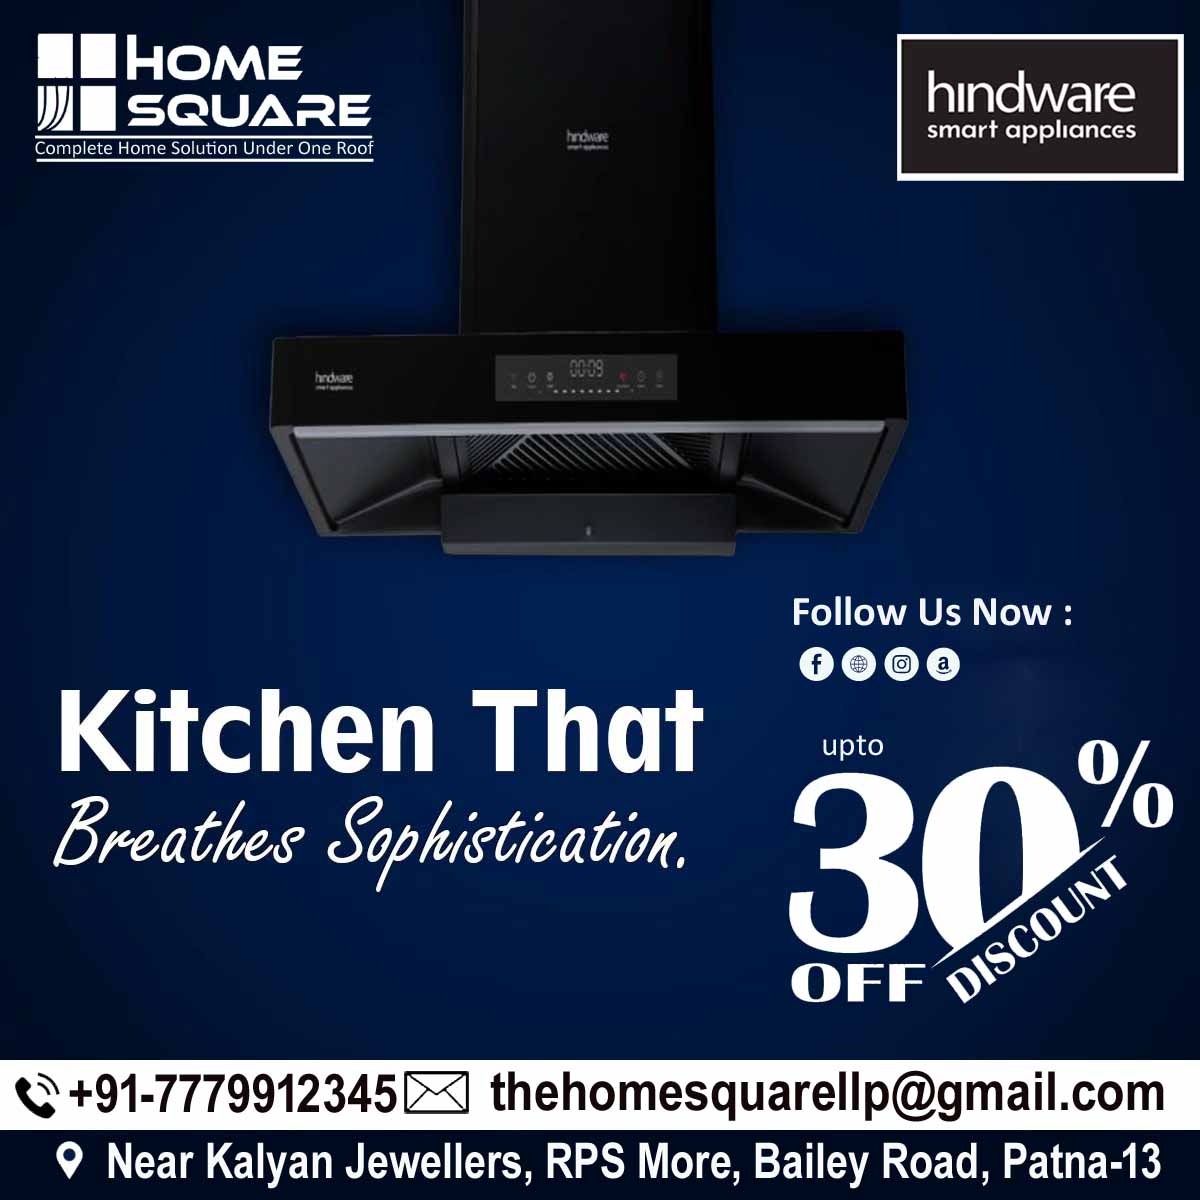 Upgrade Your Kitchen with a Unique Chimney at an Exclusive 30% Discount!

Why Choose Hindware?
Unmatched Quality
Innovative Design
Powerful Performance
Trusted Brand
#Hindware #KitchenChimney #KitchenUpgrade #SpecialOffer #ShowroomDiscount #CookingExperience #HomeImprovement